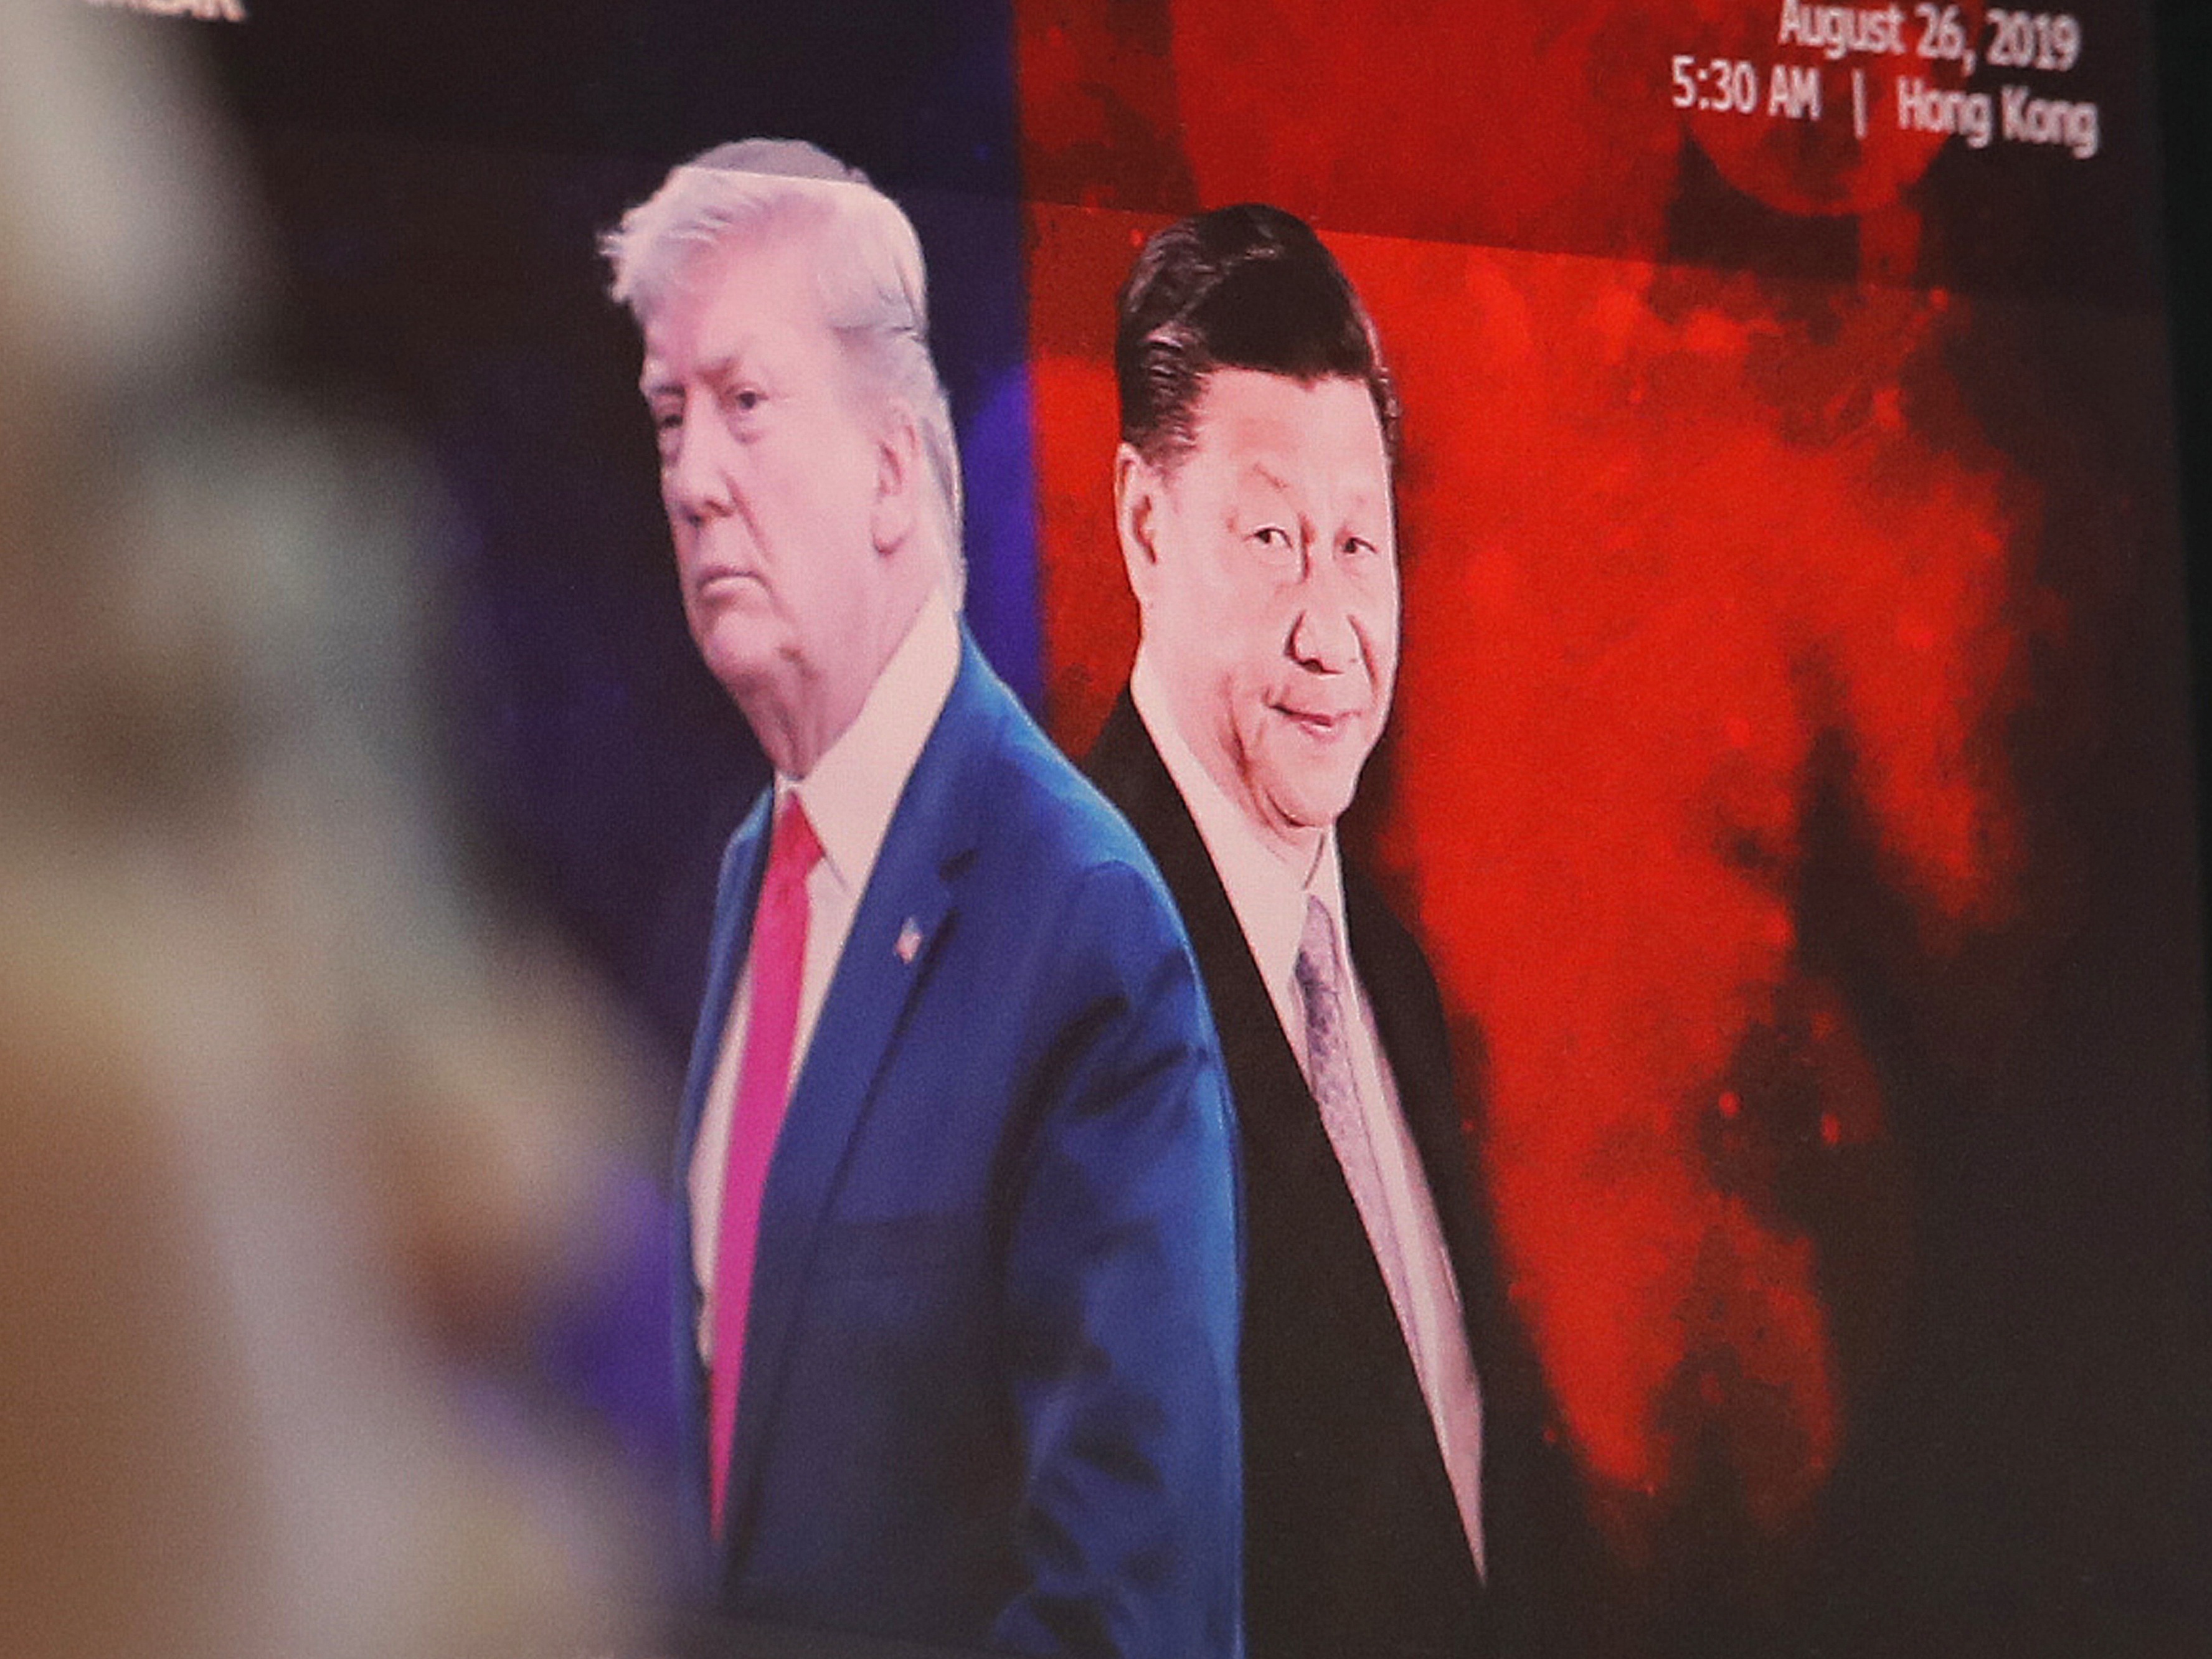 A computer screen in Seoul shows images of Chinese President Xi Jinping and President Donald Trump in 2019. Ahn Young-joon/AP